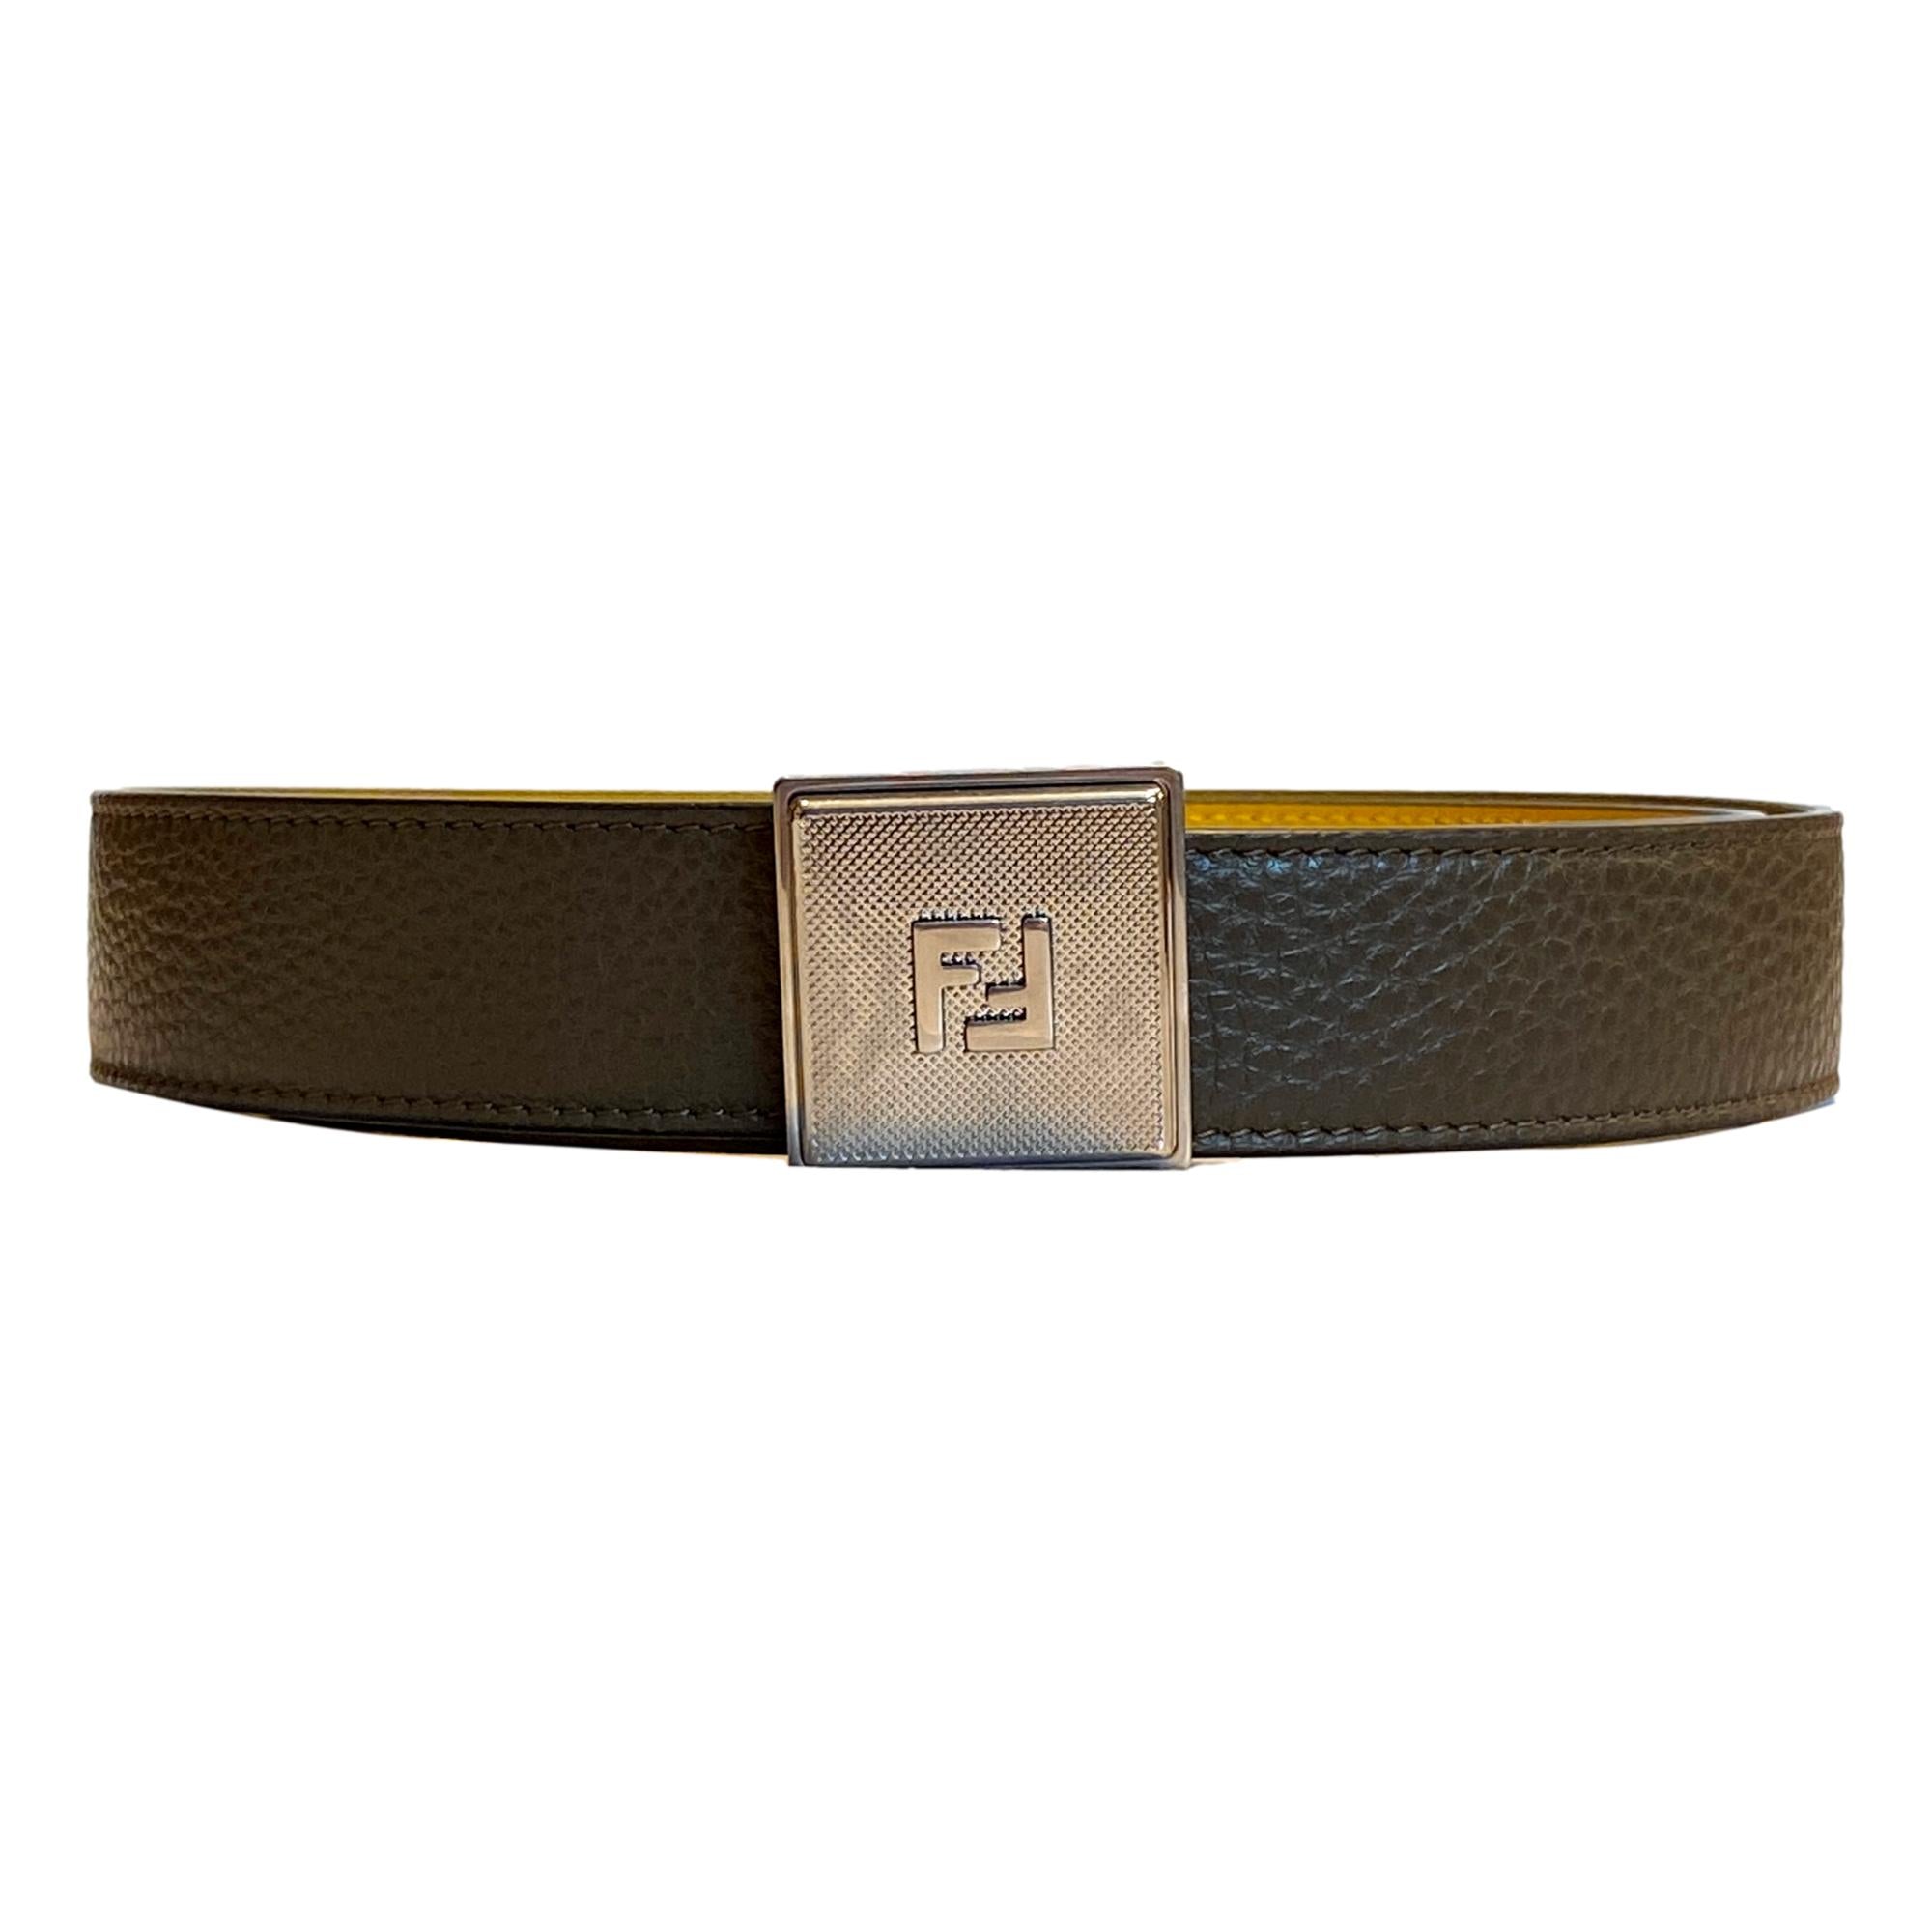 Fendi Yellow Brown Reversible Grained Leather Belt 100